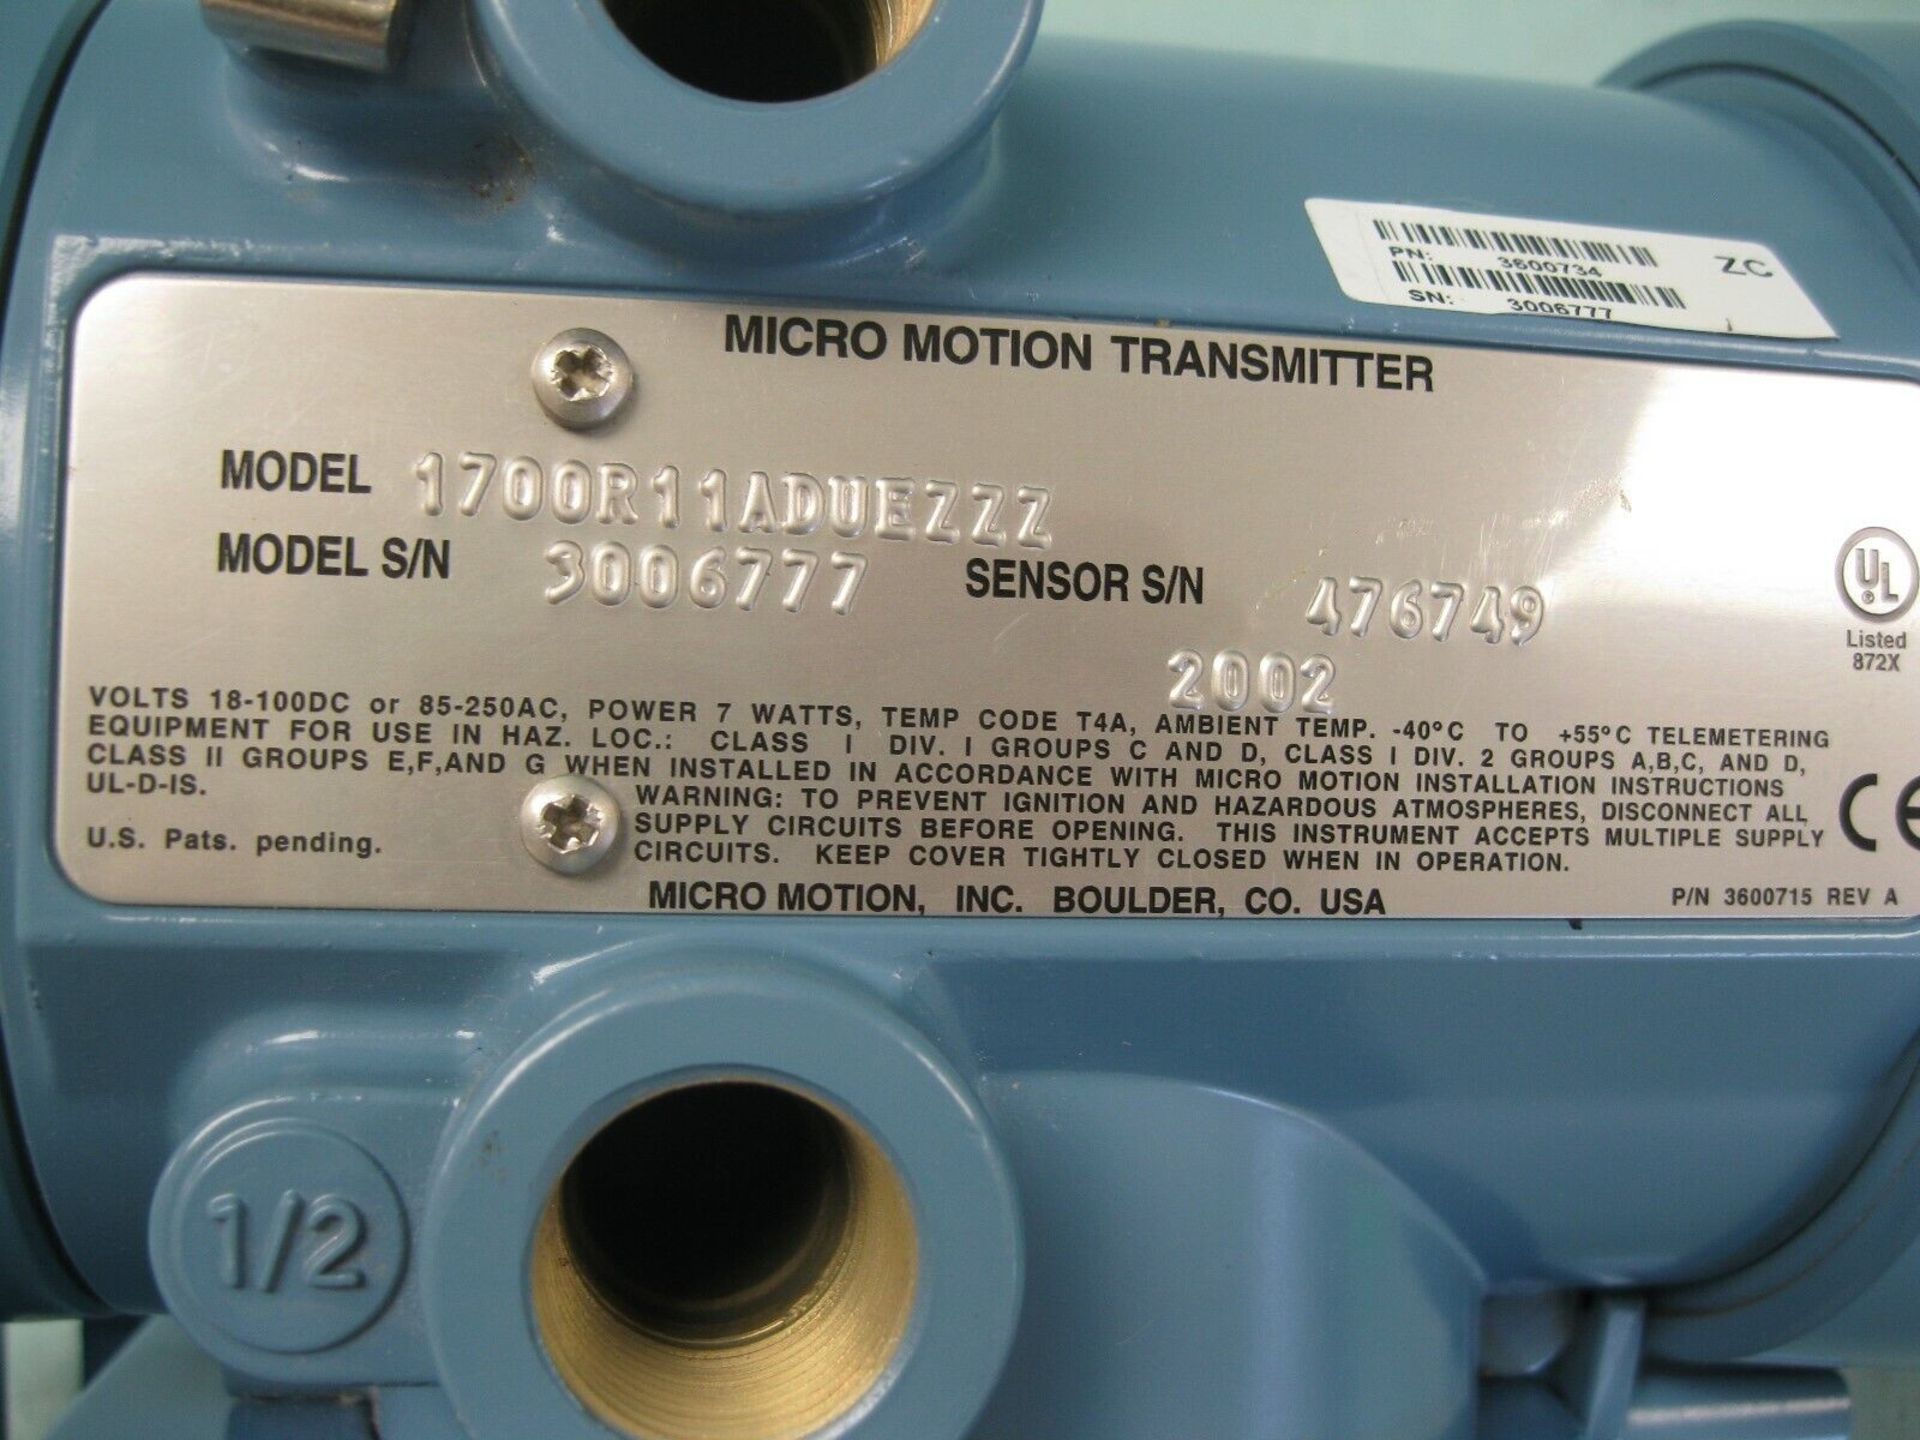 Micro Motion 1700 R11 AD UEZZZ Transmitter 2002 NEW (Located Springfield, NH) (Loading Fee $25) - Image 3 of 3